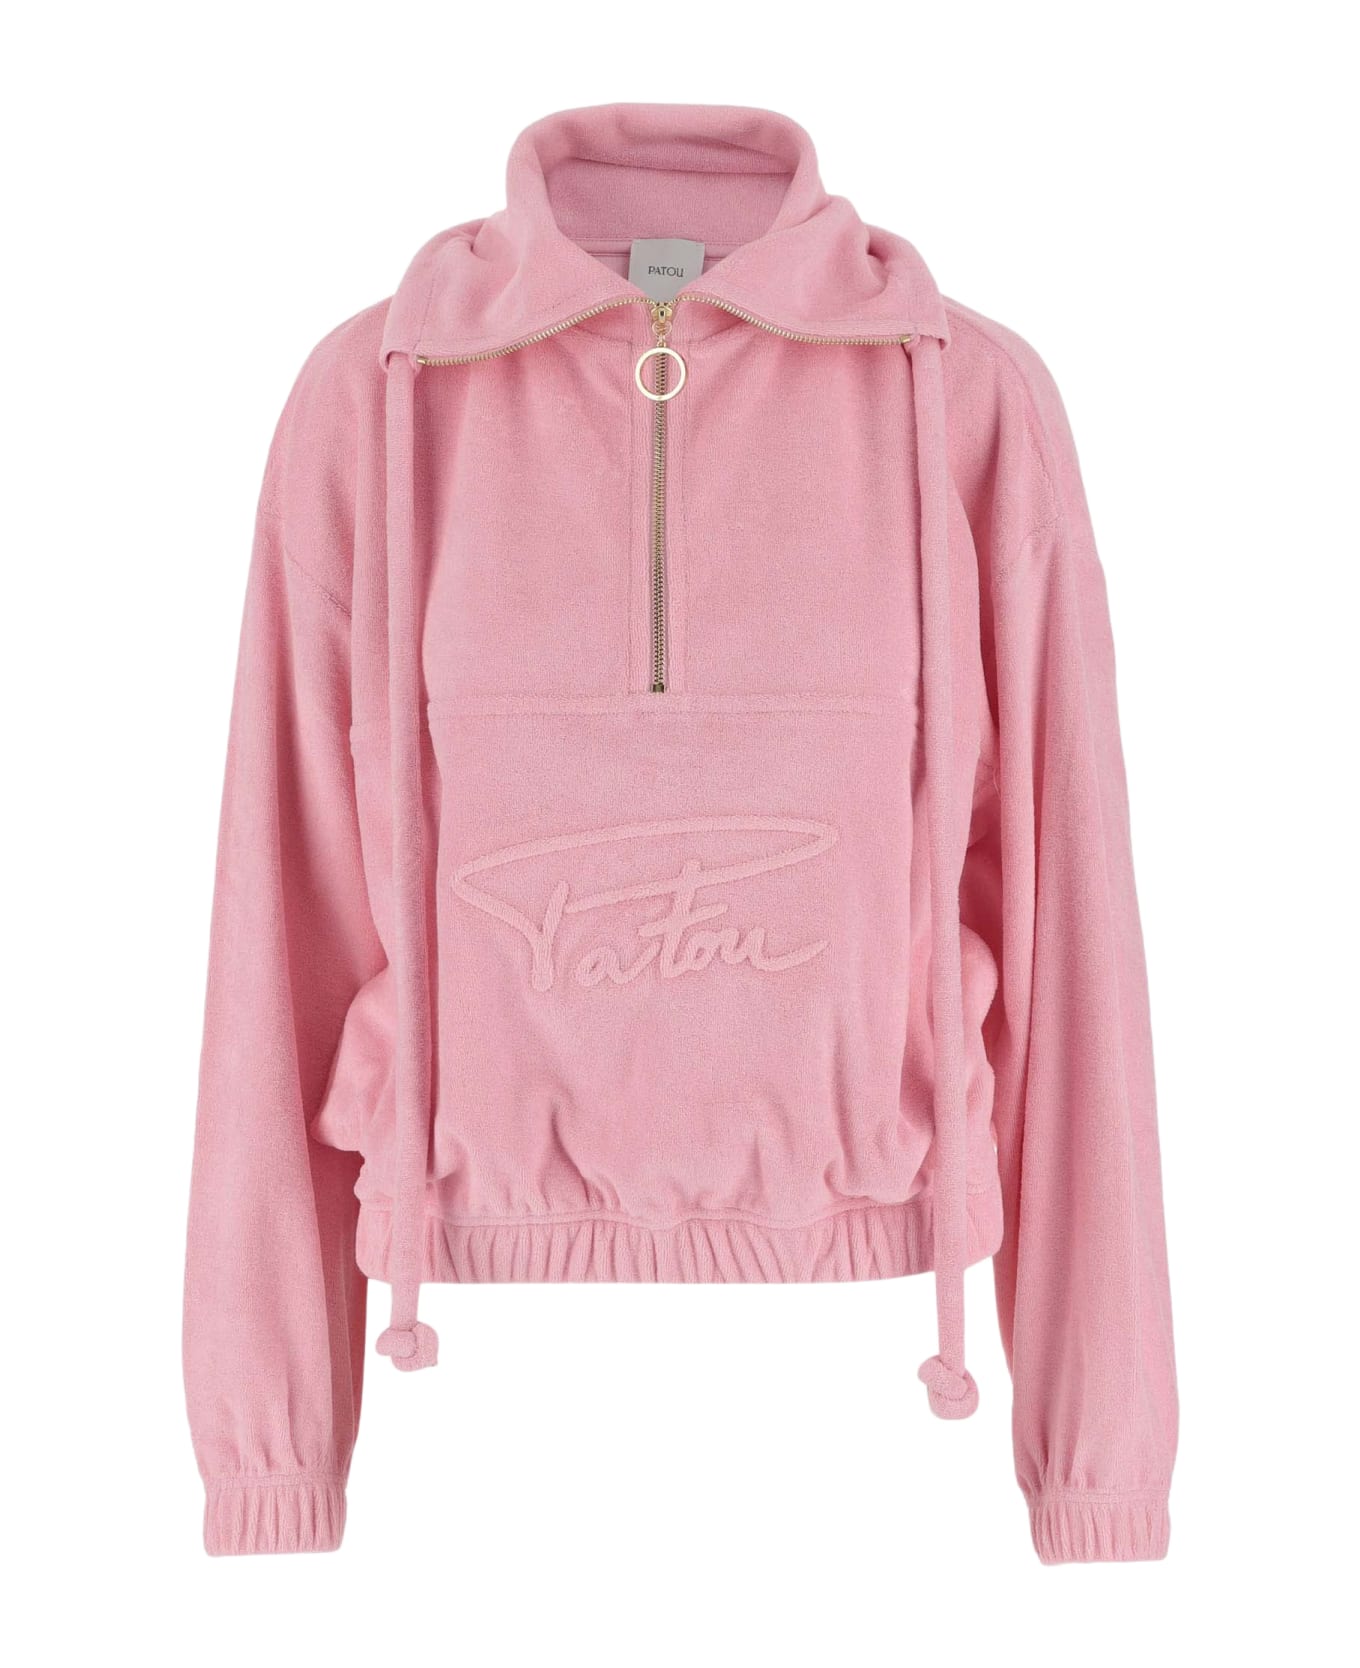 Patou Cotton Sweatshirt With Embossed Patou Signature - Pink